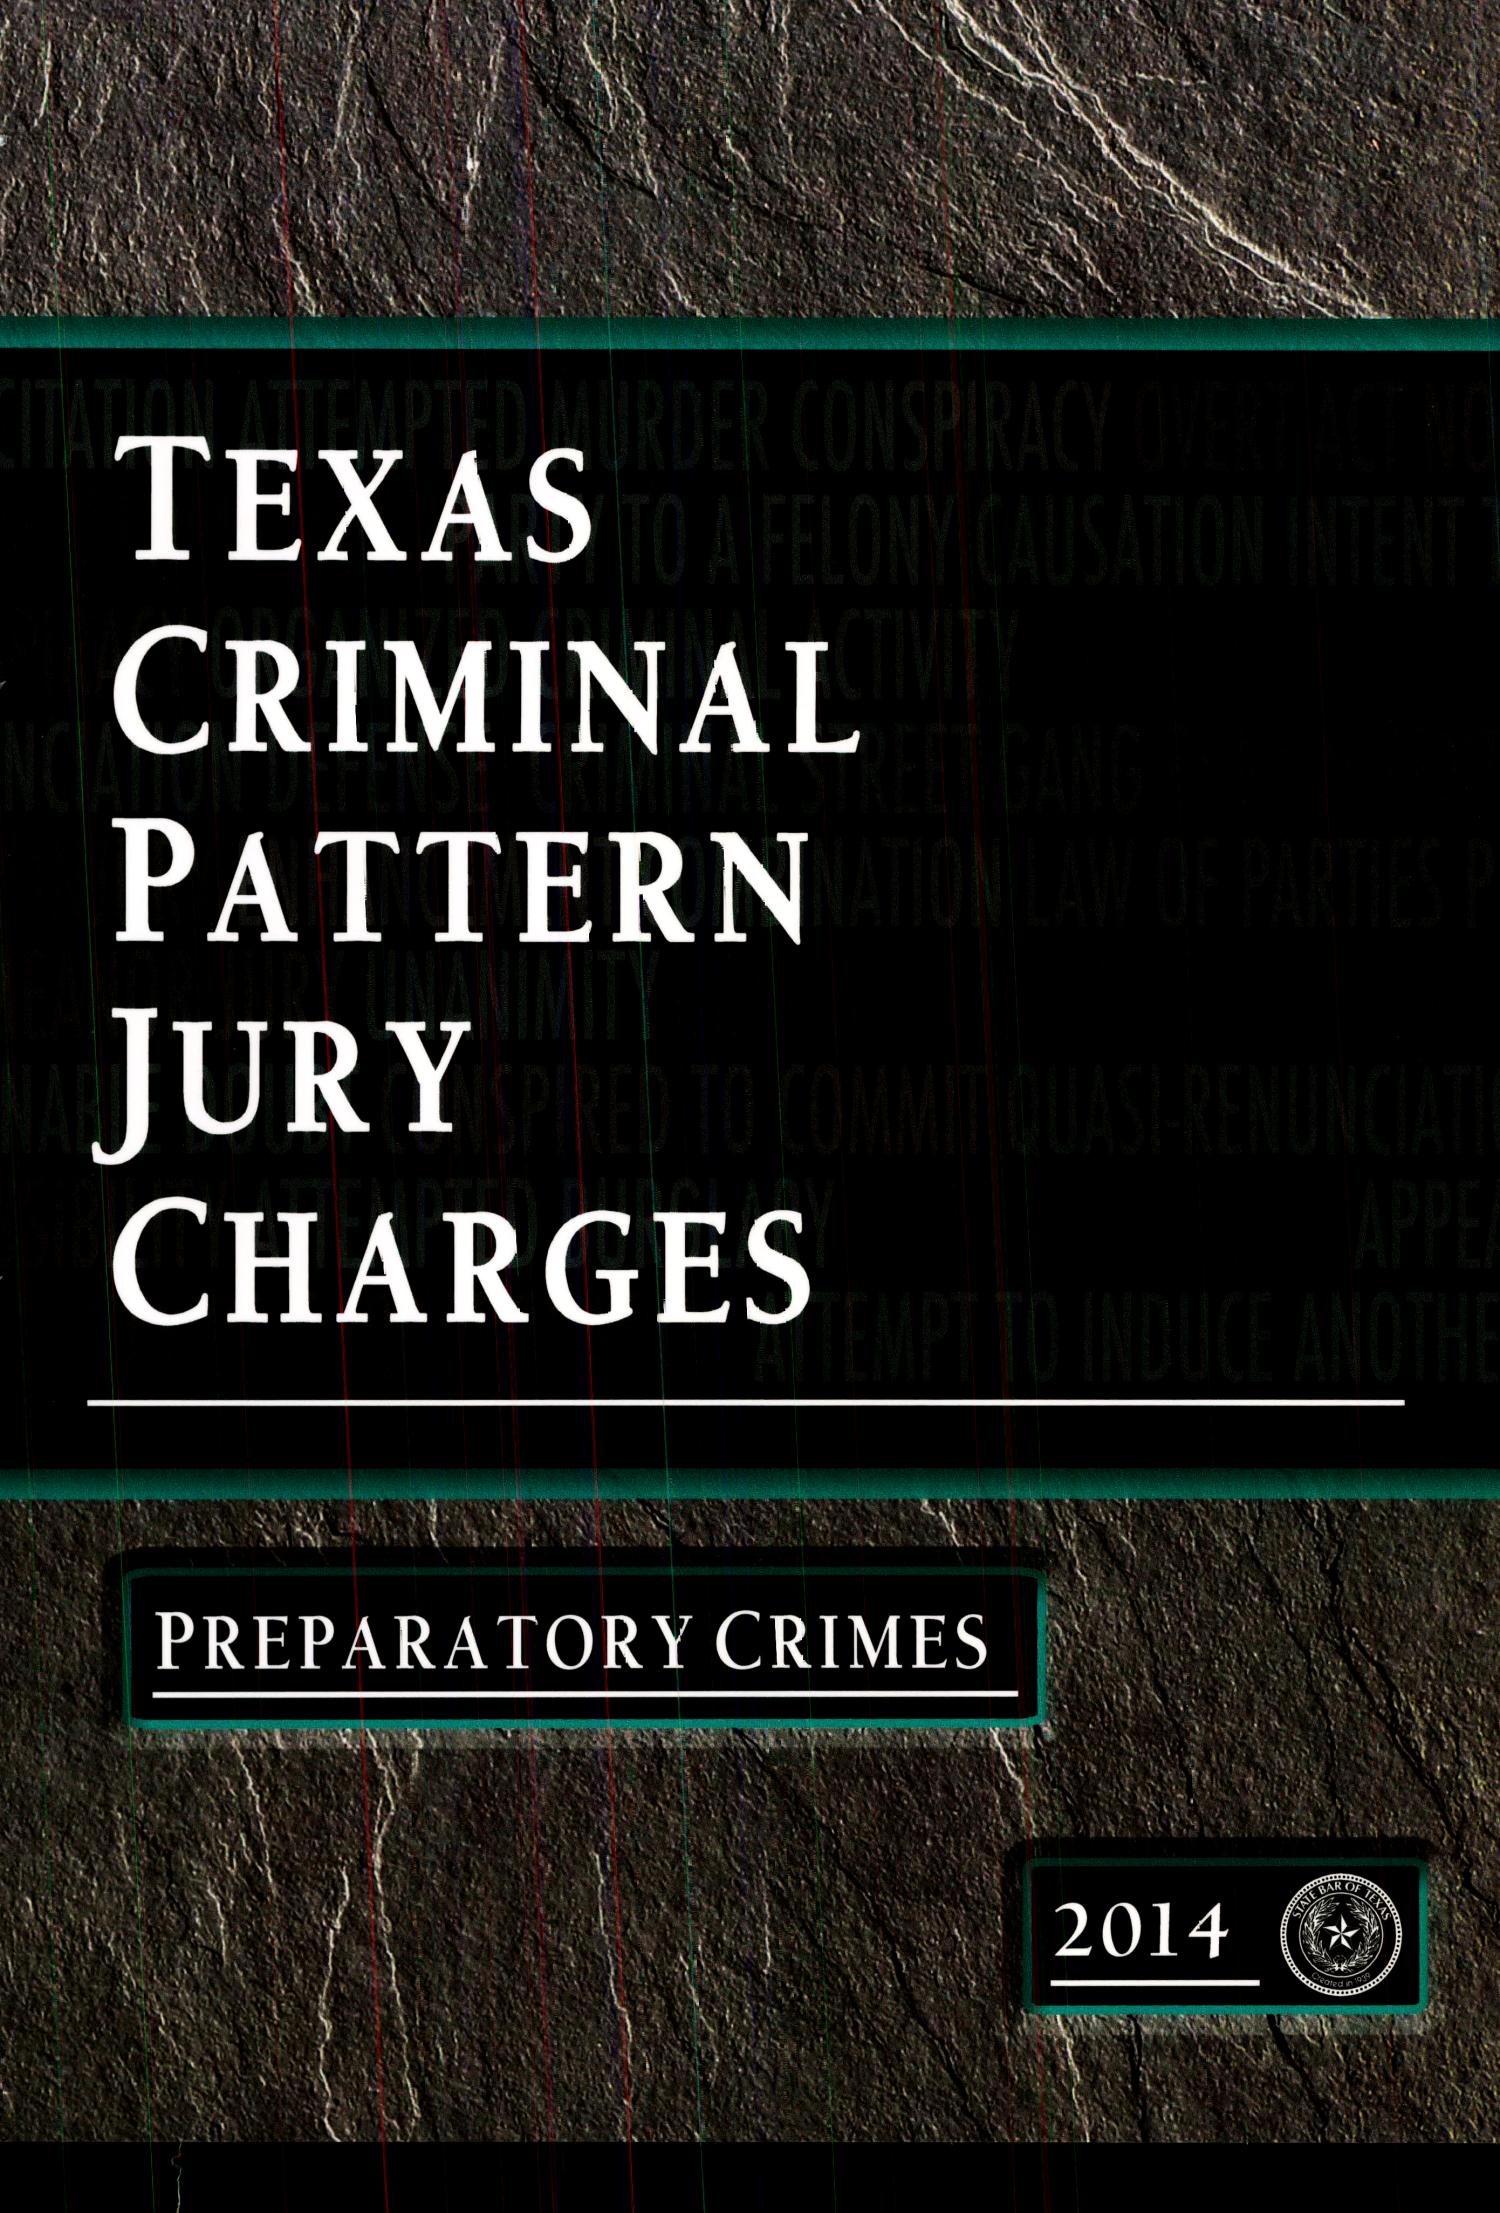 Texas Criminal Pattern Jury Charges Preparatory Crimes The Portal to